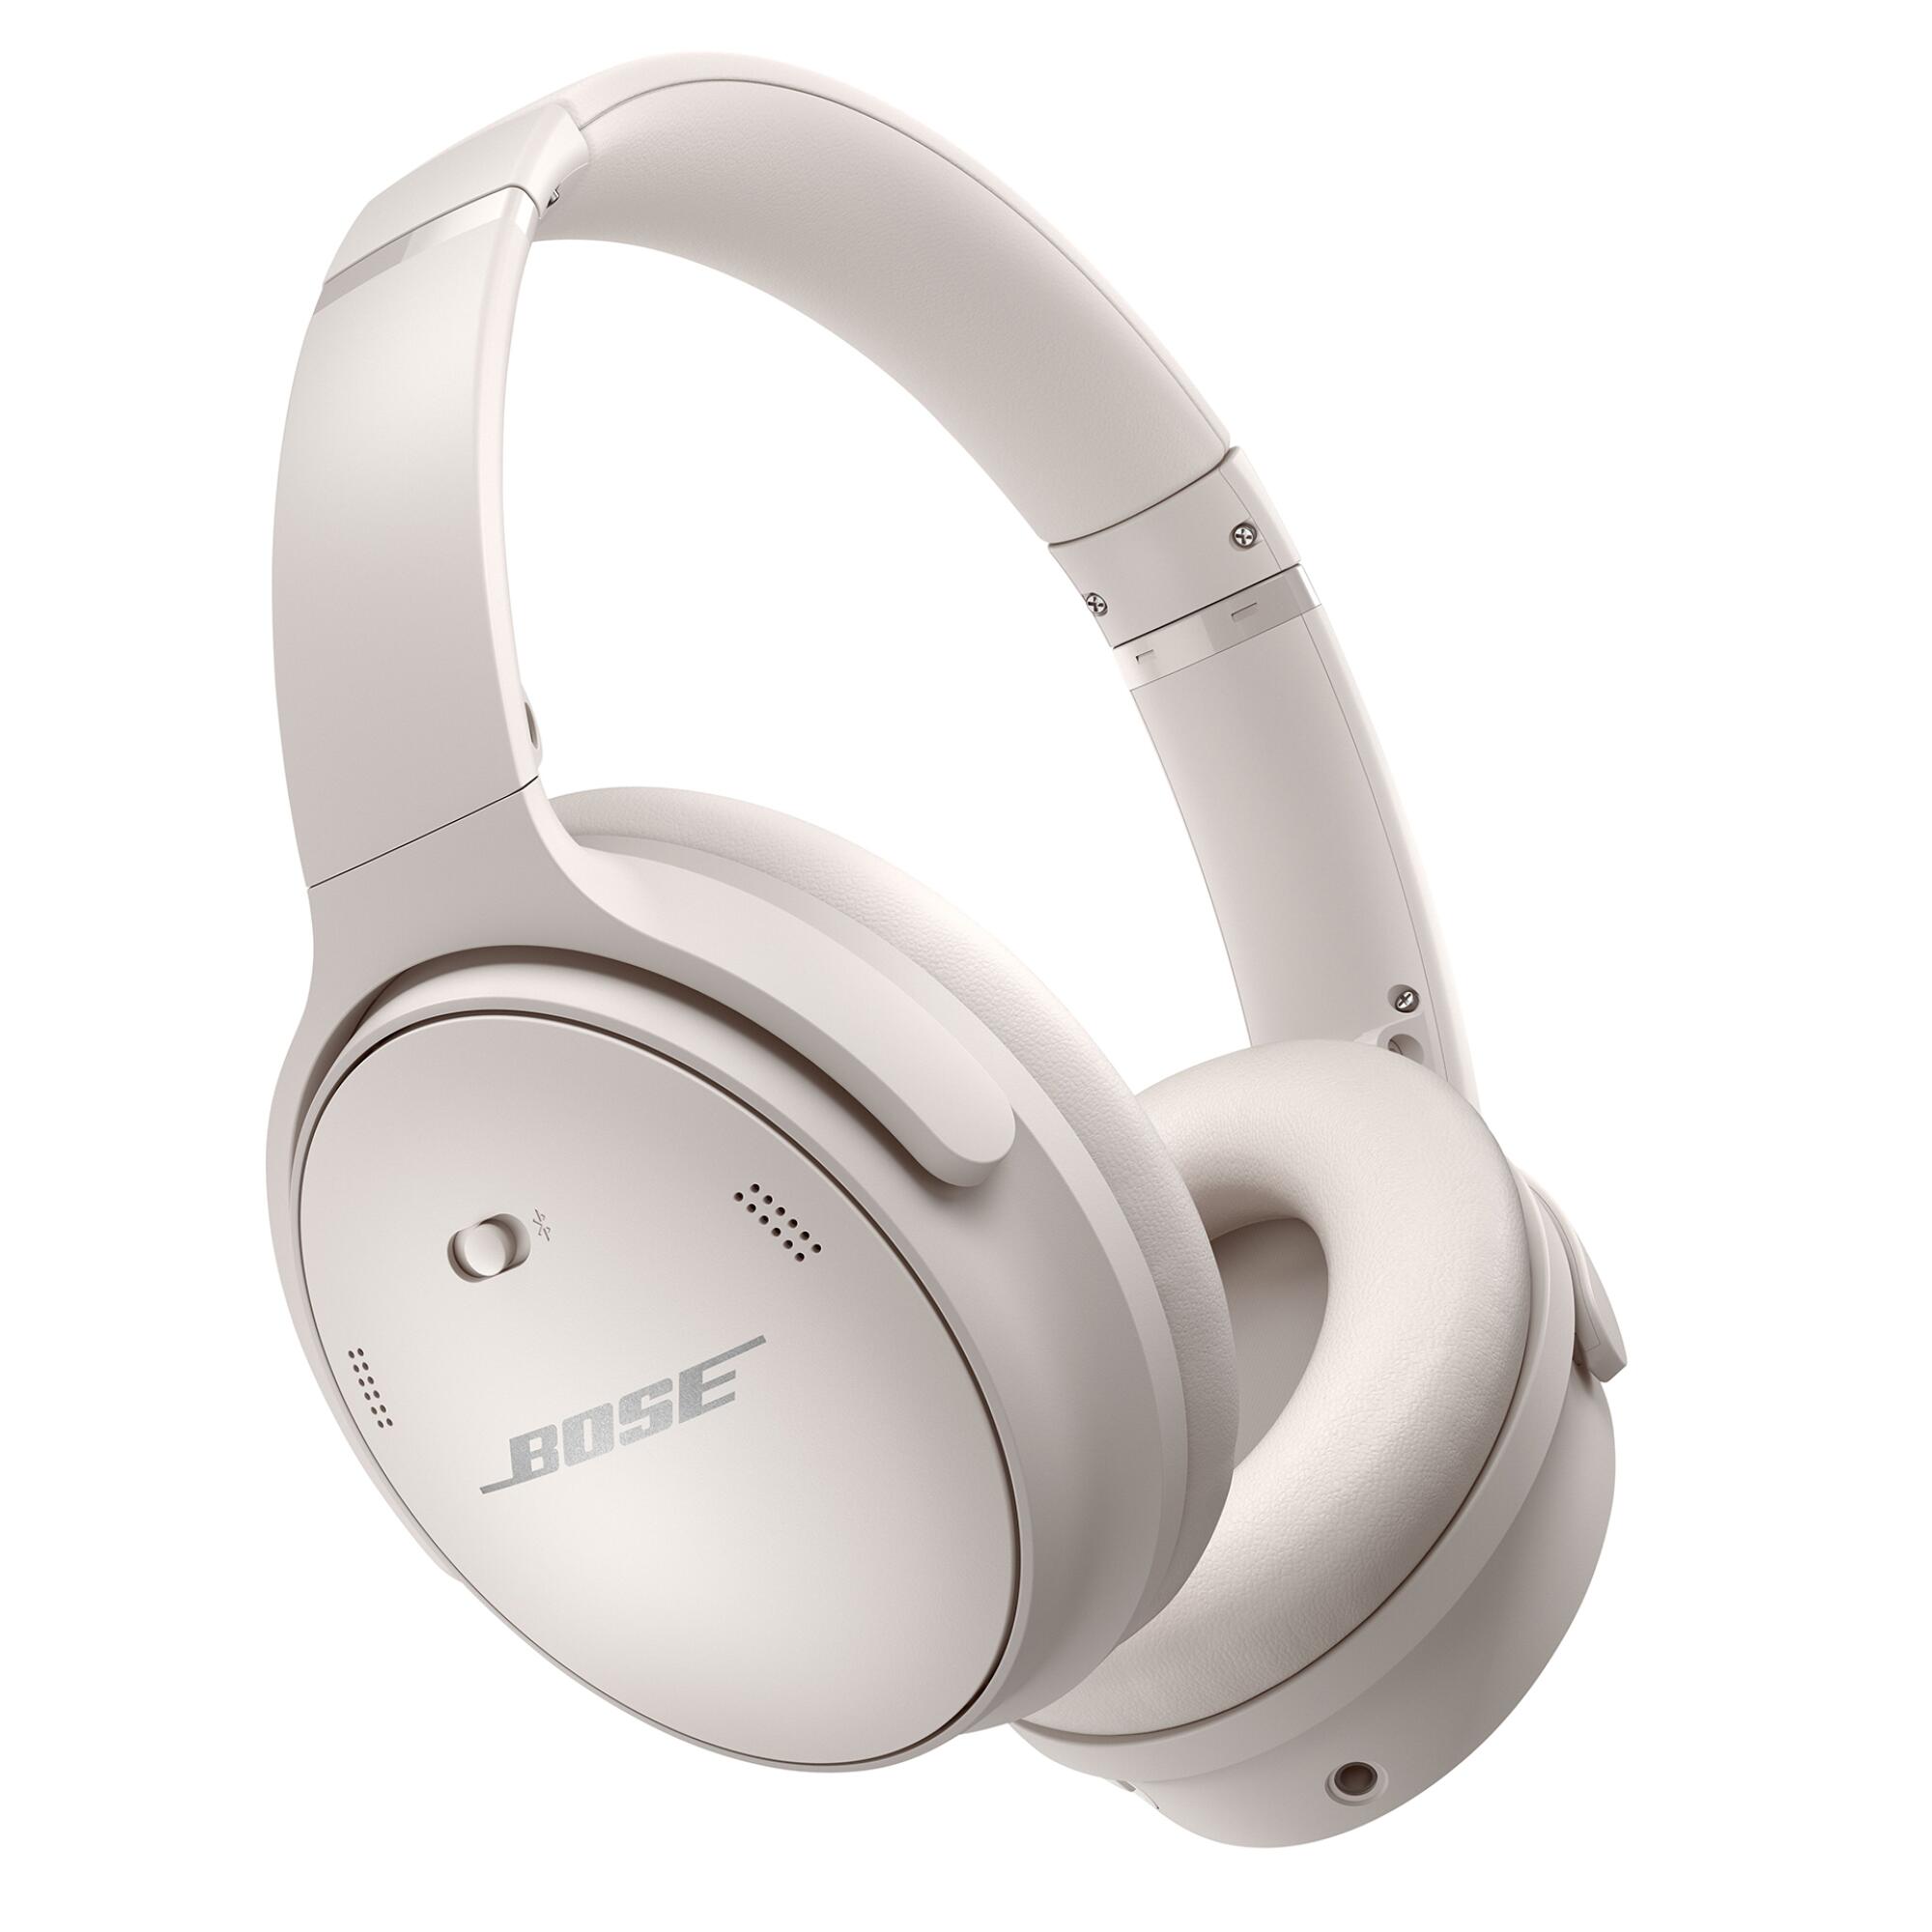 White headphones by Bose